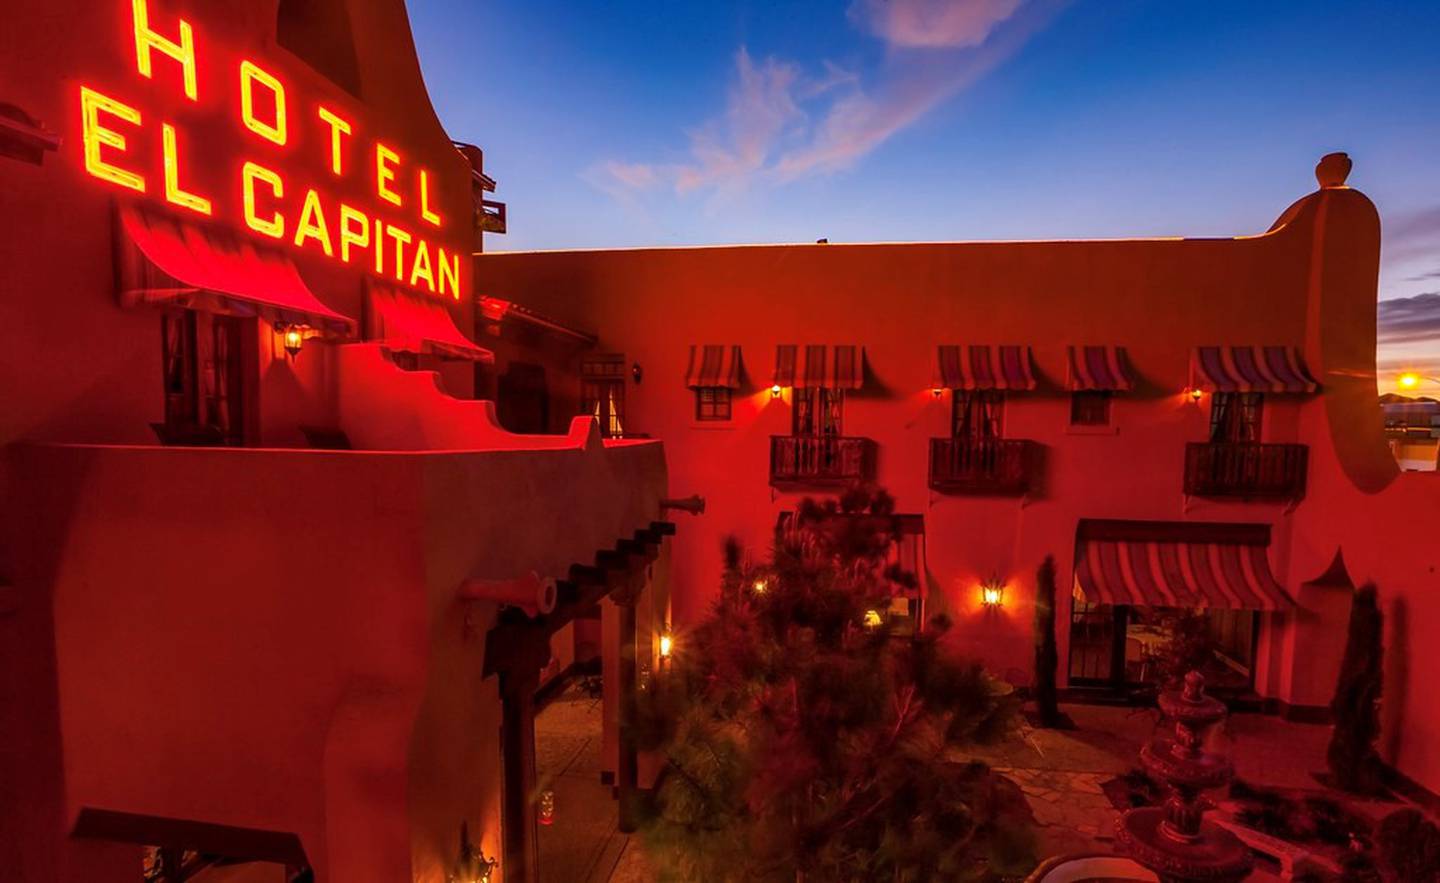 Hotel El Capitan is one of the most popular places to stay not only in west Texas, but in the whole state. Photo: Thomas Millard